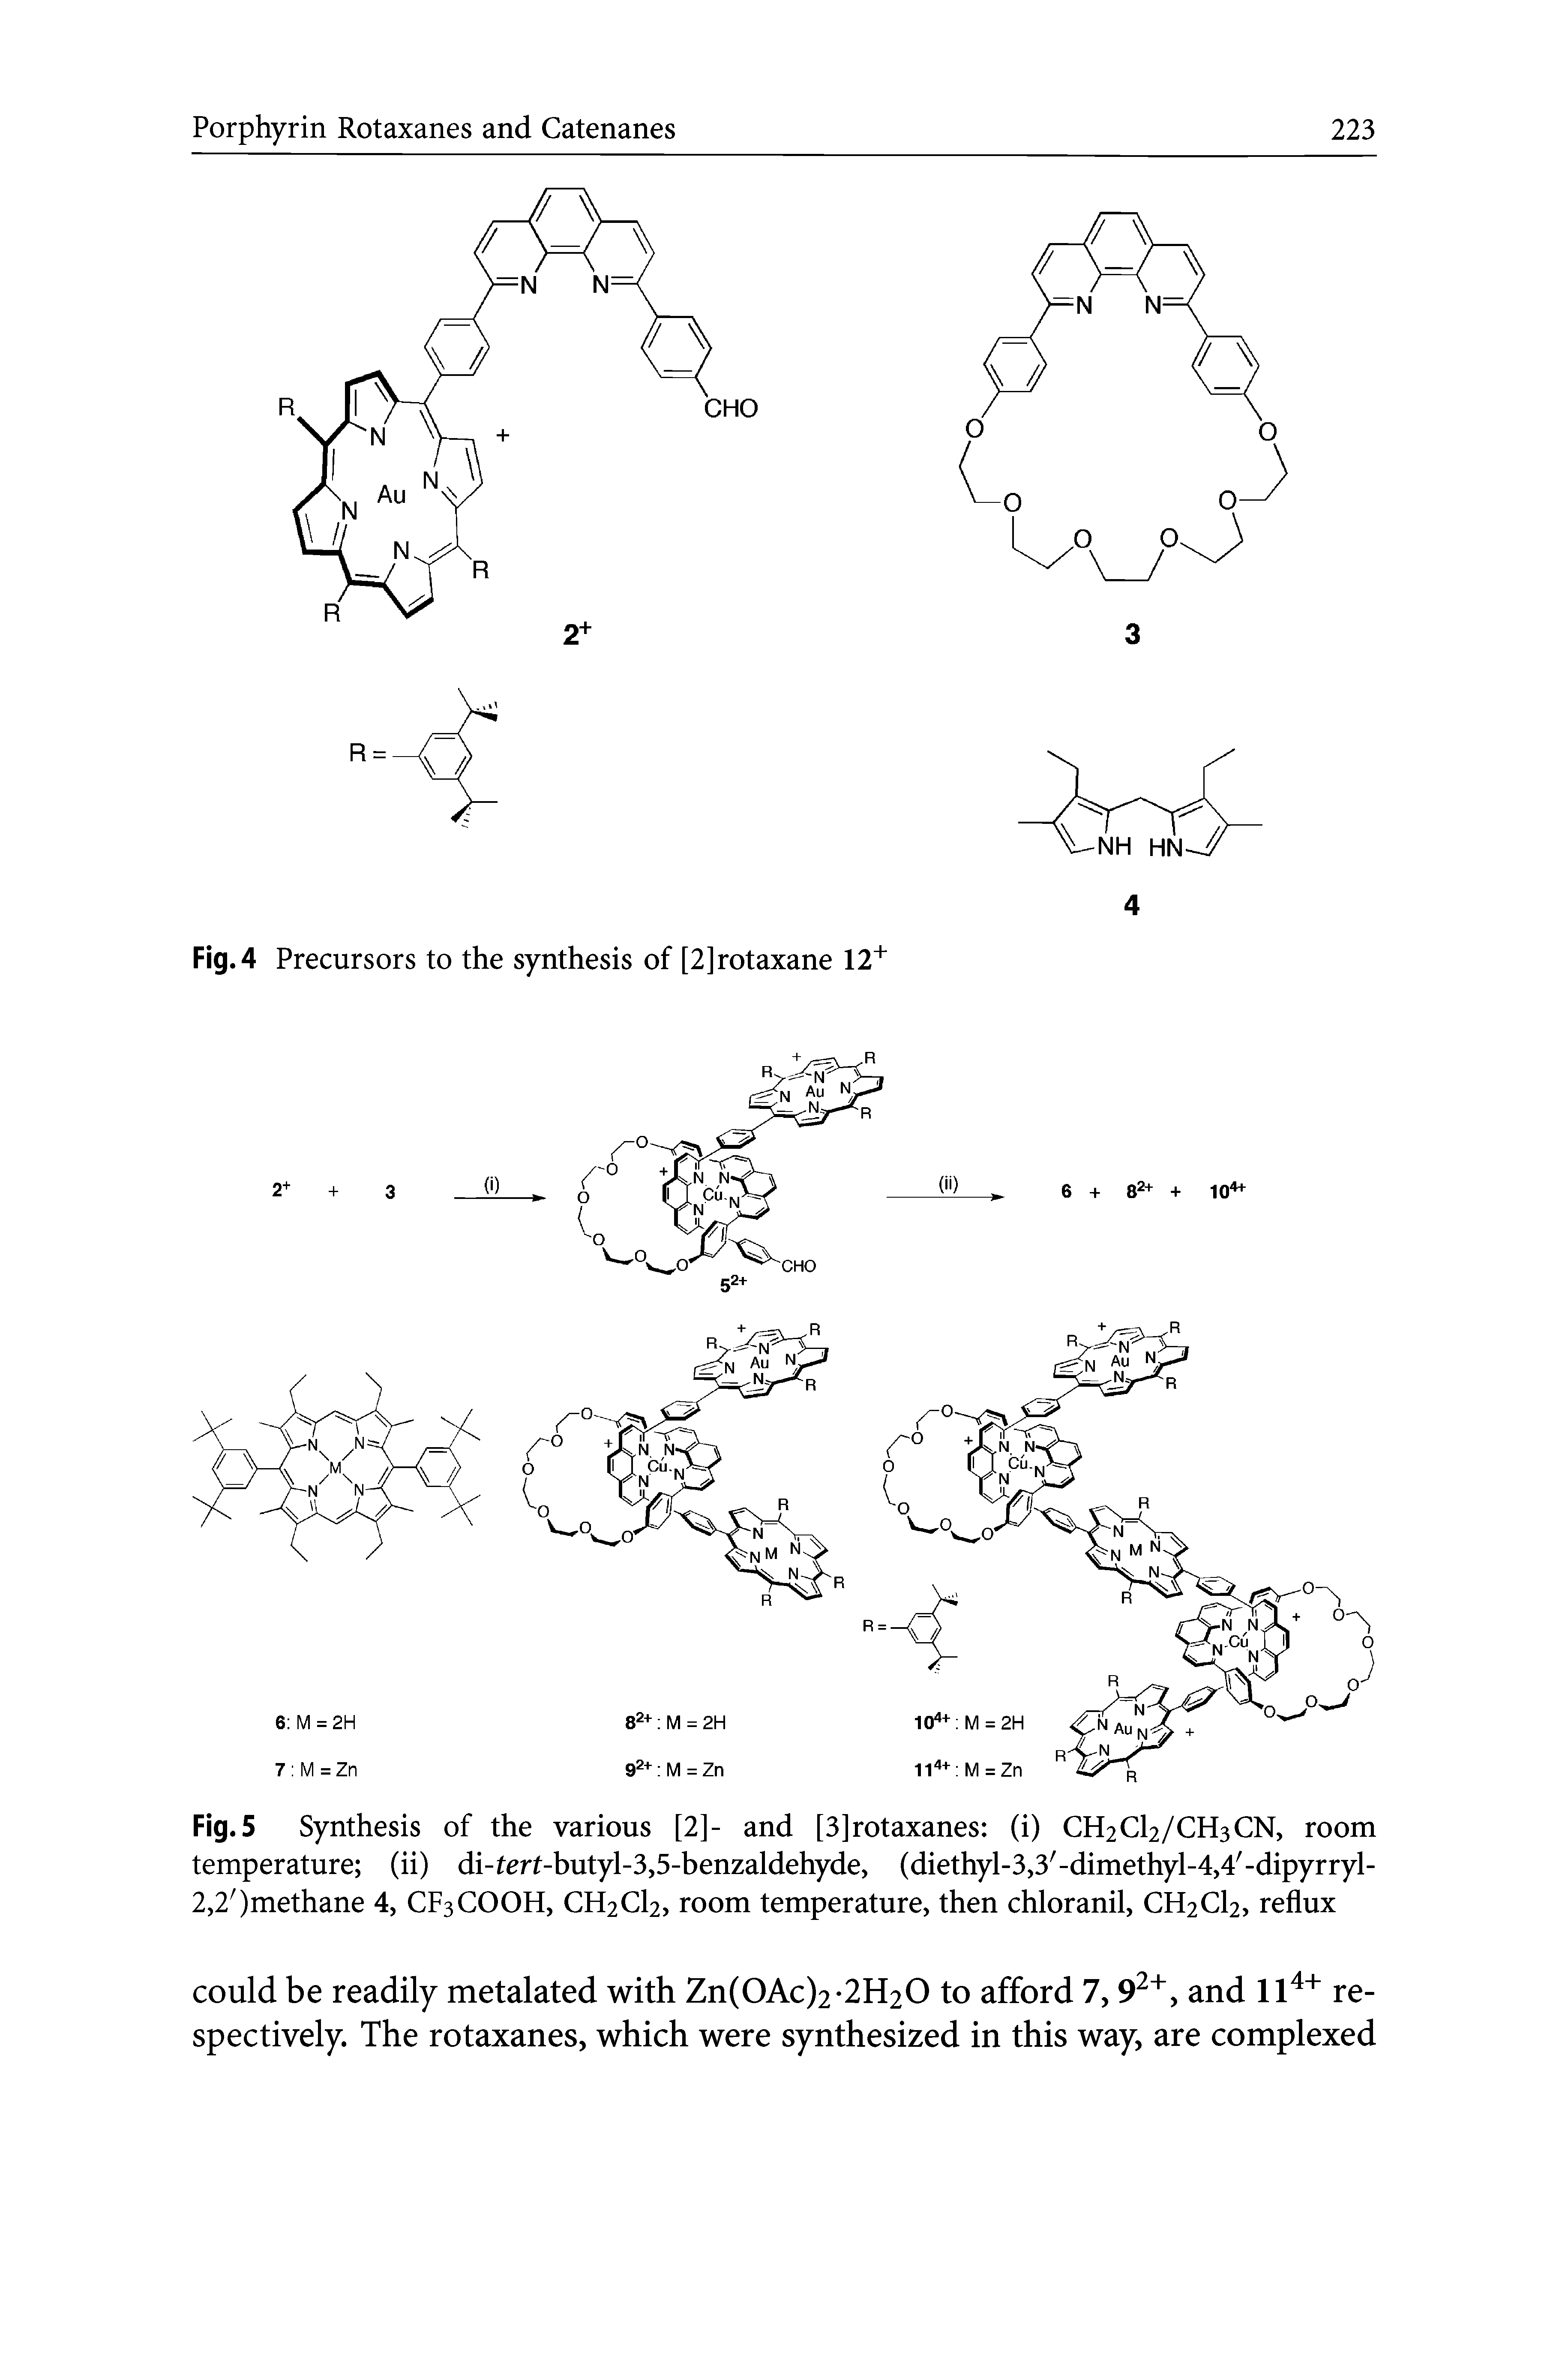 Fig.5 Synthesis of the various [2]- and [3]rotaxanes (i) CH2CI2/CH3CN, room temperature (ii) di-fert-butyl-3,5-benzaldehyde, (diethyl-3,3 -dimethyl-4,4 -dipyrryl-2,2 )methane 4, CF3COOH, CH2CI2, room temperature, then chloranil, CH2CI2, reflux...